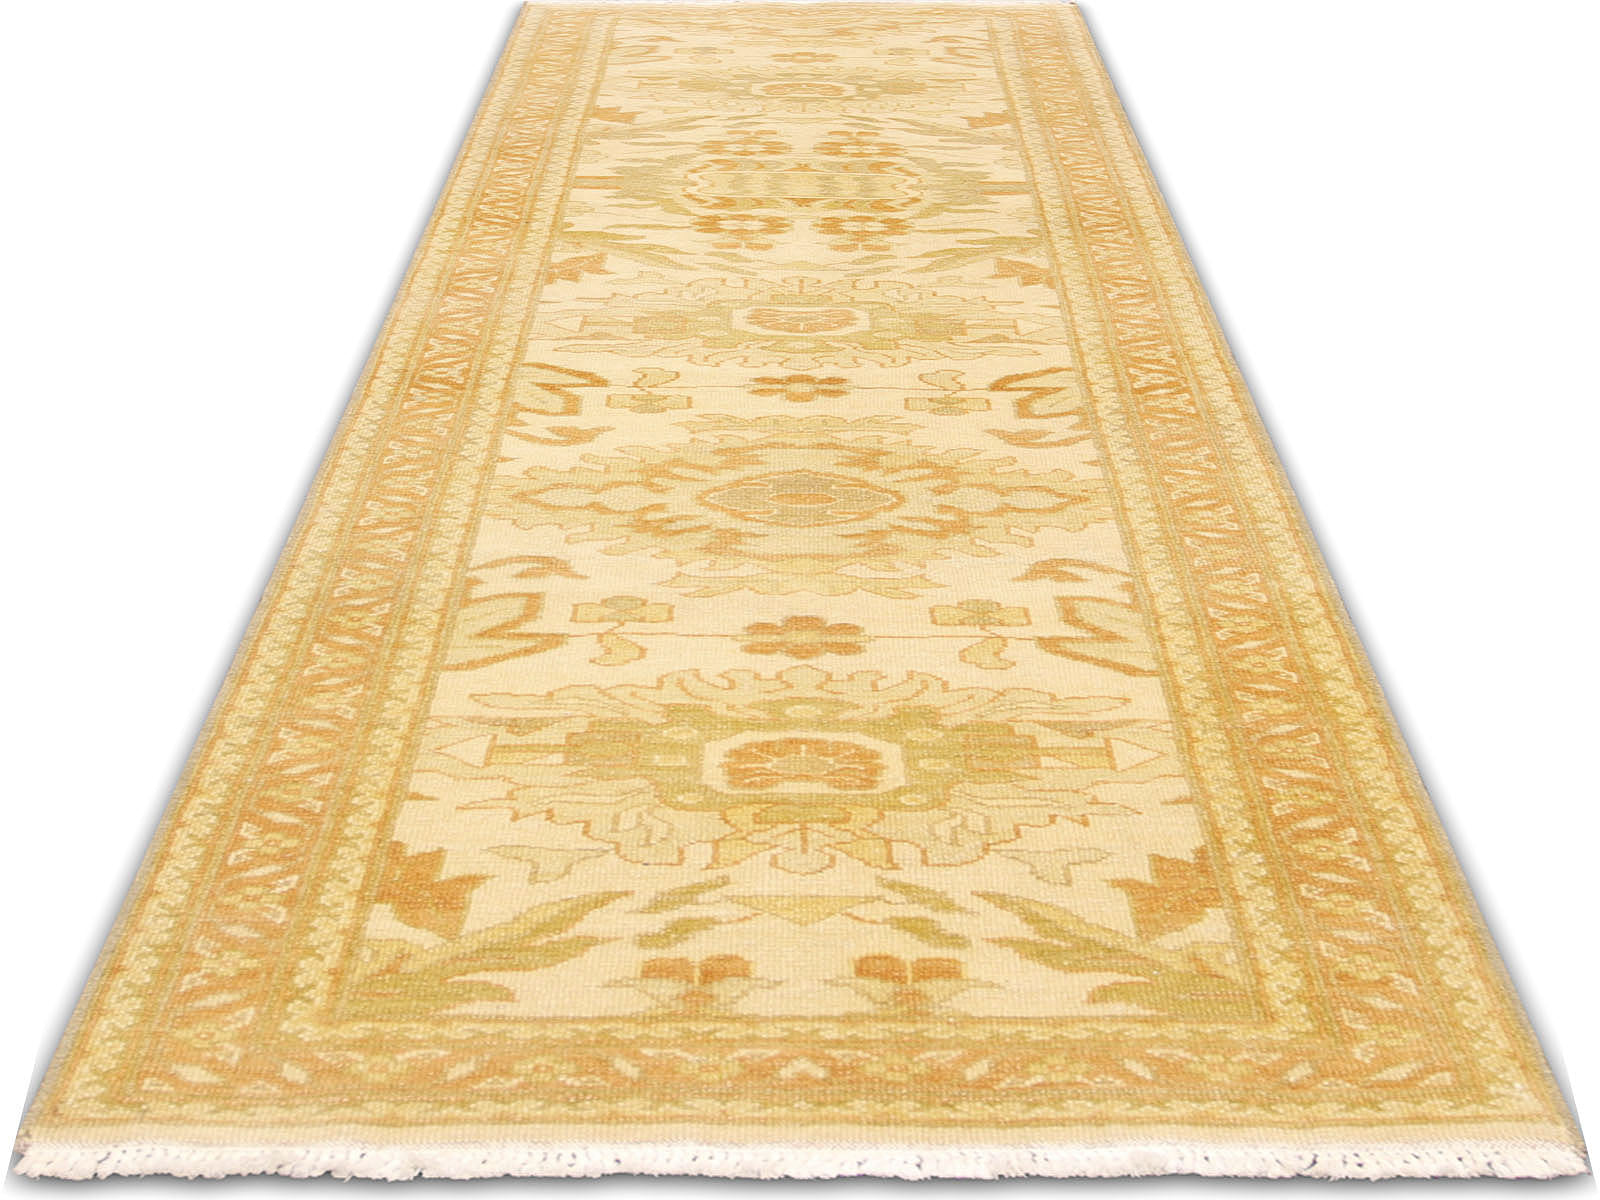 Vintage Egyptian Sultanabad Runner - 2'7" x 9'9"